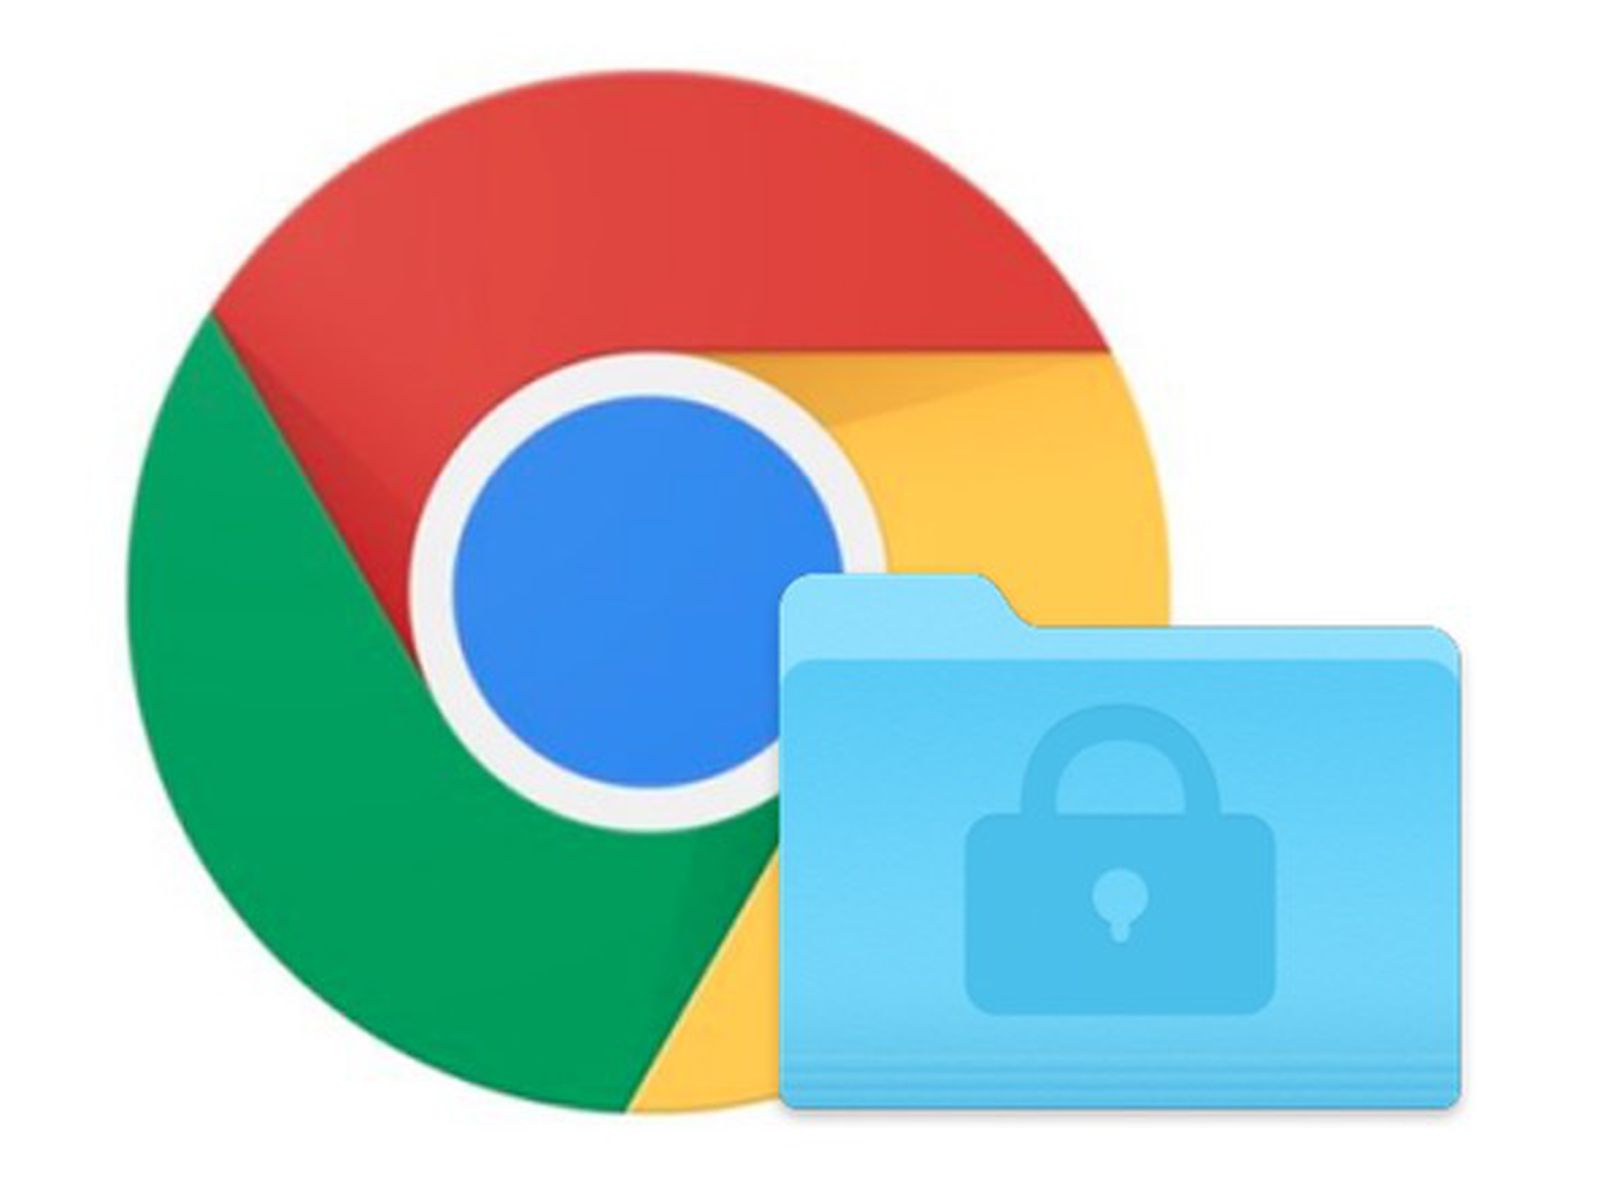 how to download google chrome on macbook